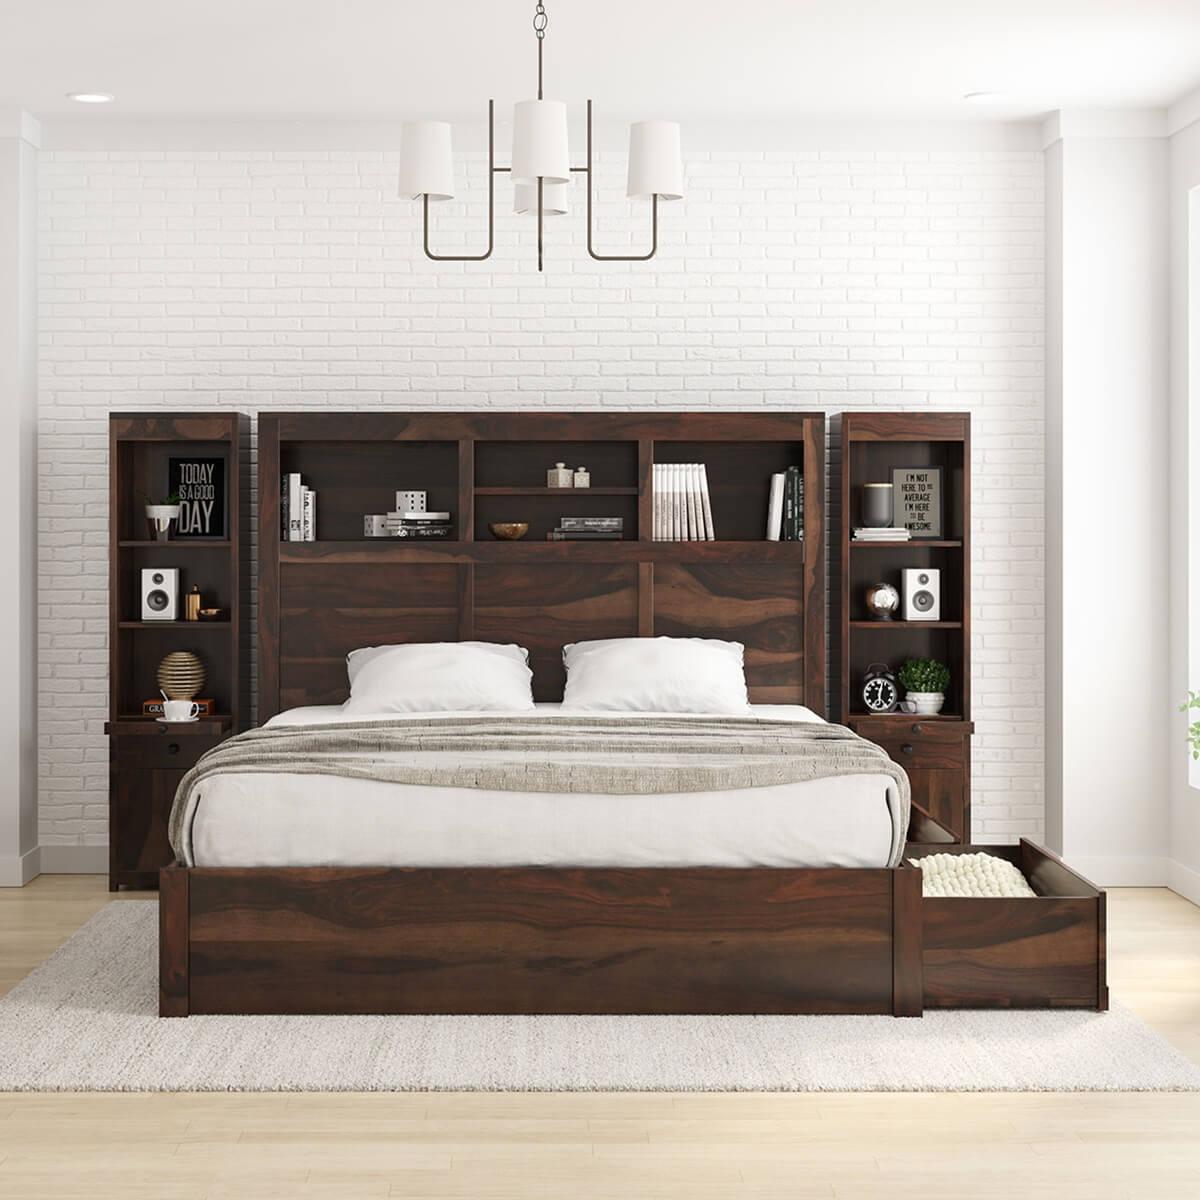 How To Attach A Headboard Any Bed, Platform Bed Frame That Connects To Headboard